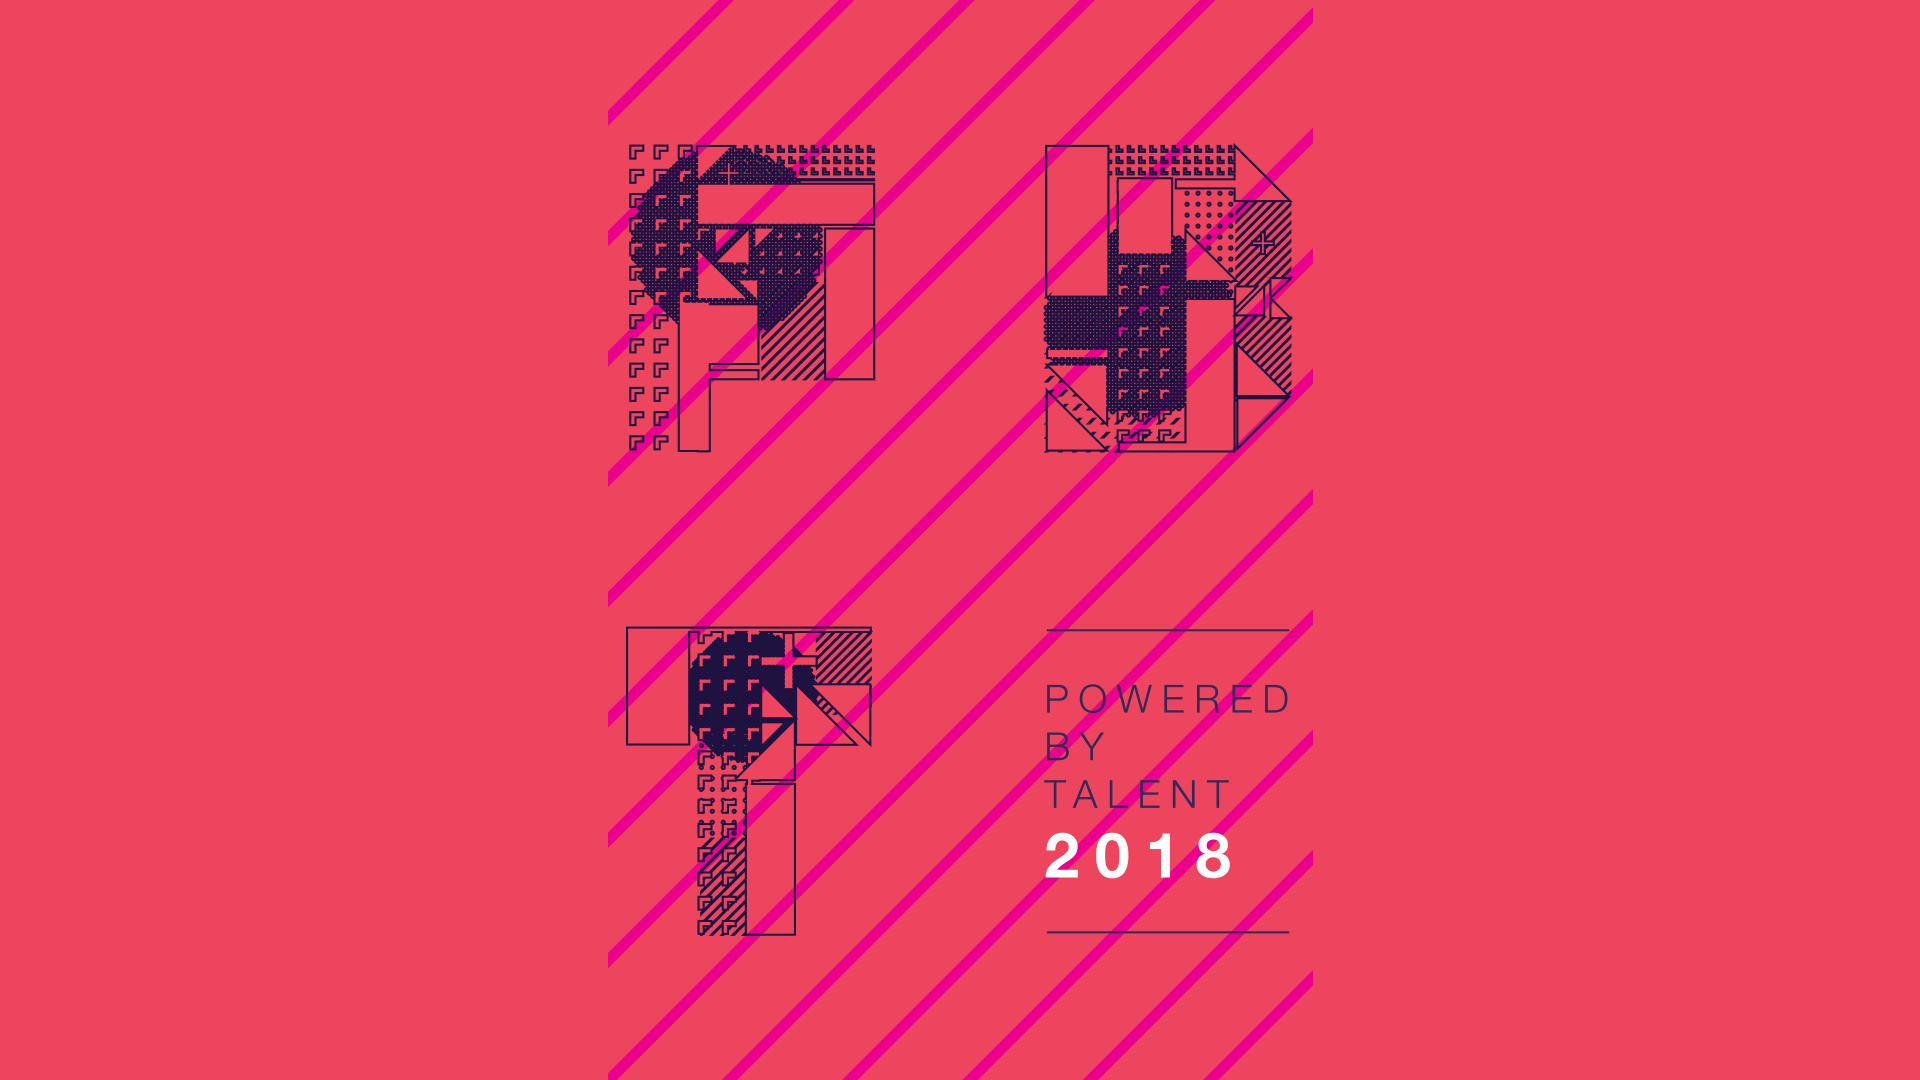 Red colour variant of Powered by Talent poster